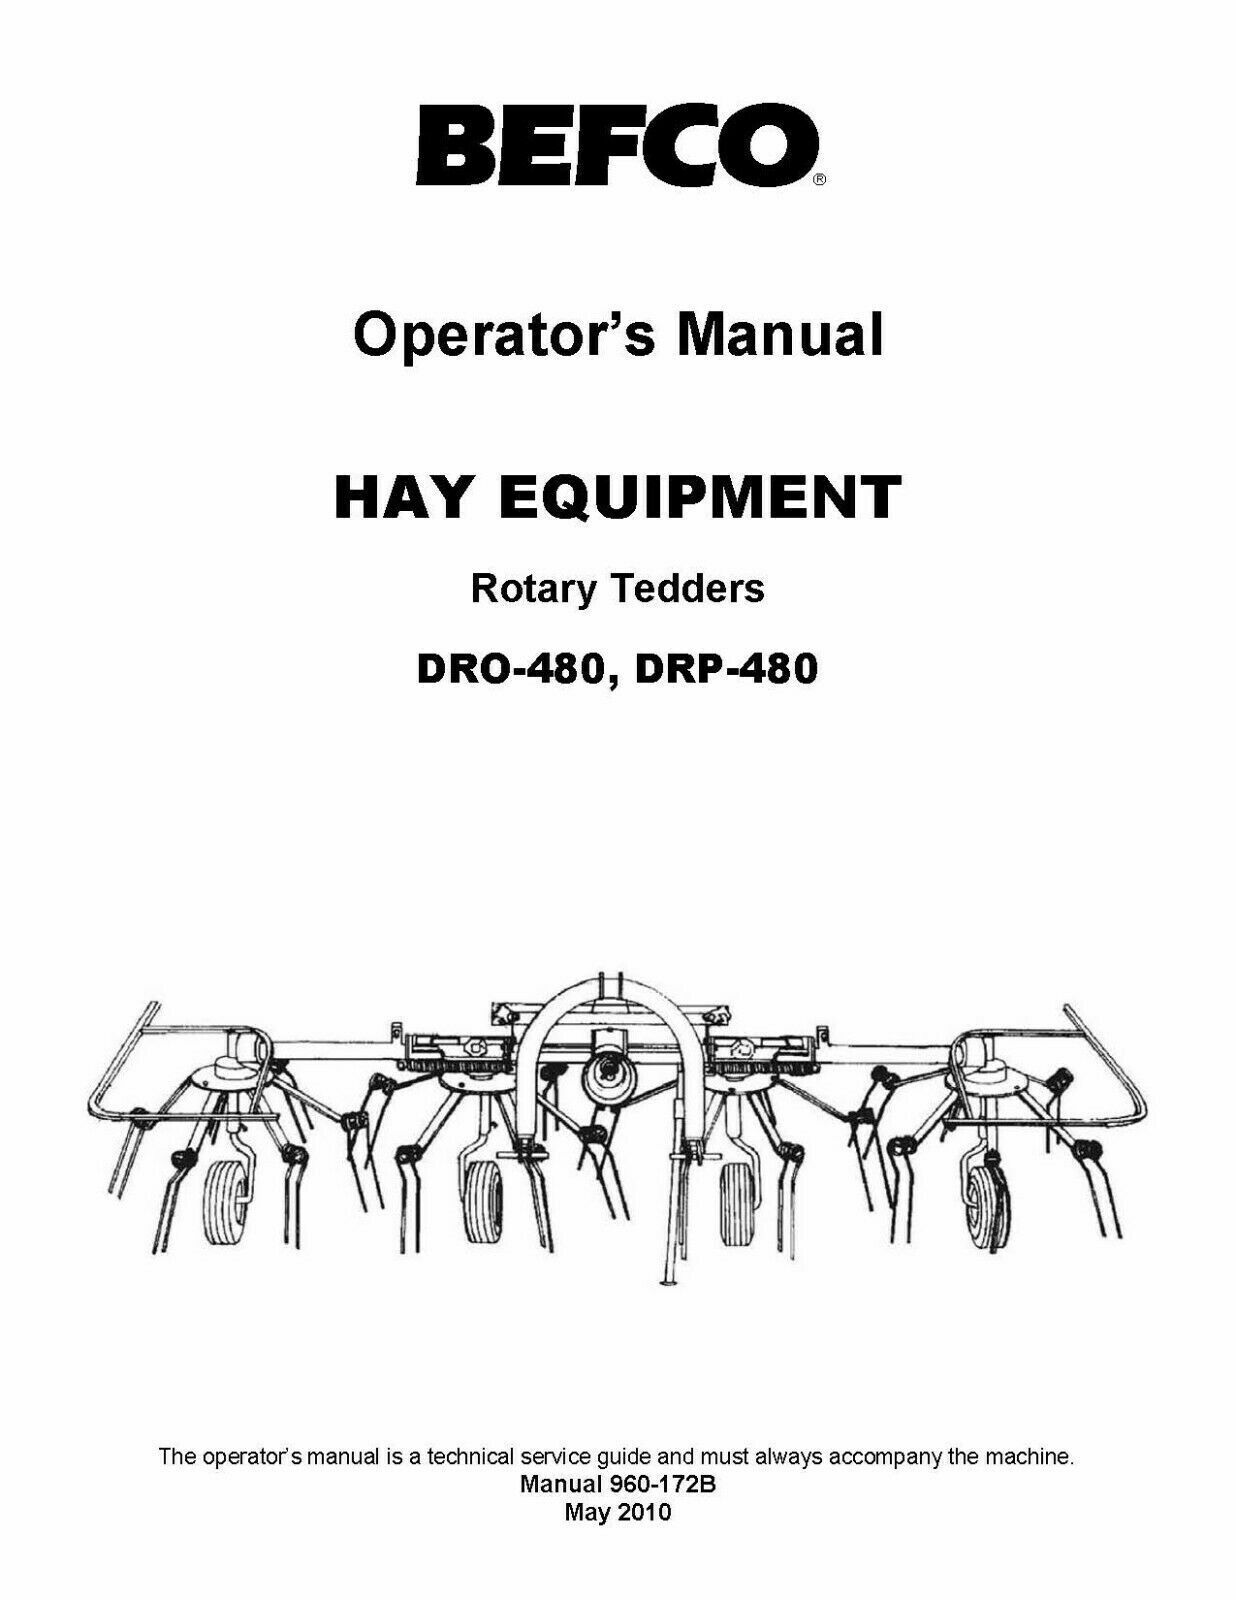 Hay Rotary Tedders Operator Inst Maint & Service Parts Man BEFCO DRO-480 DRP-480